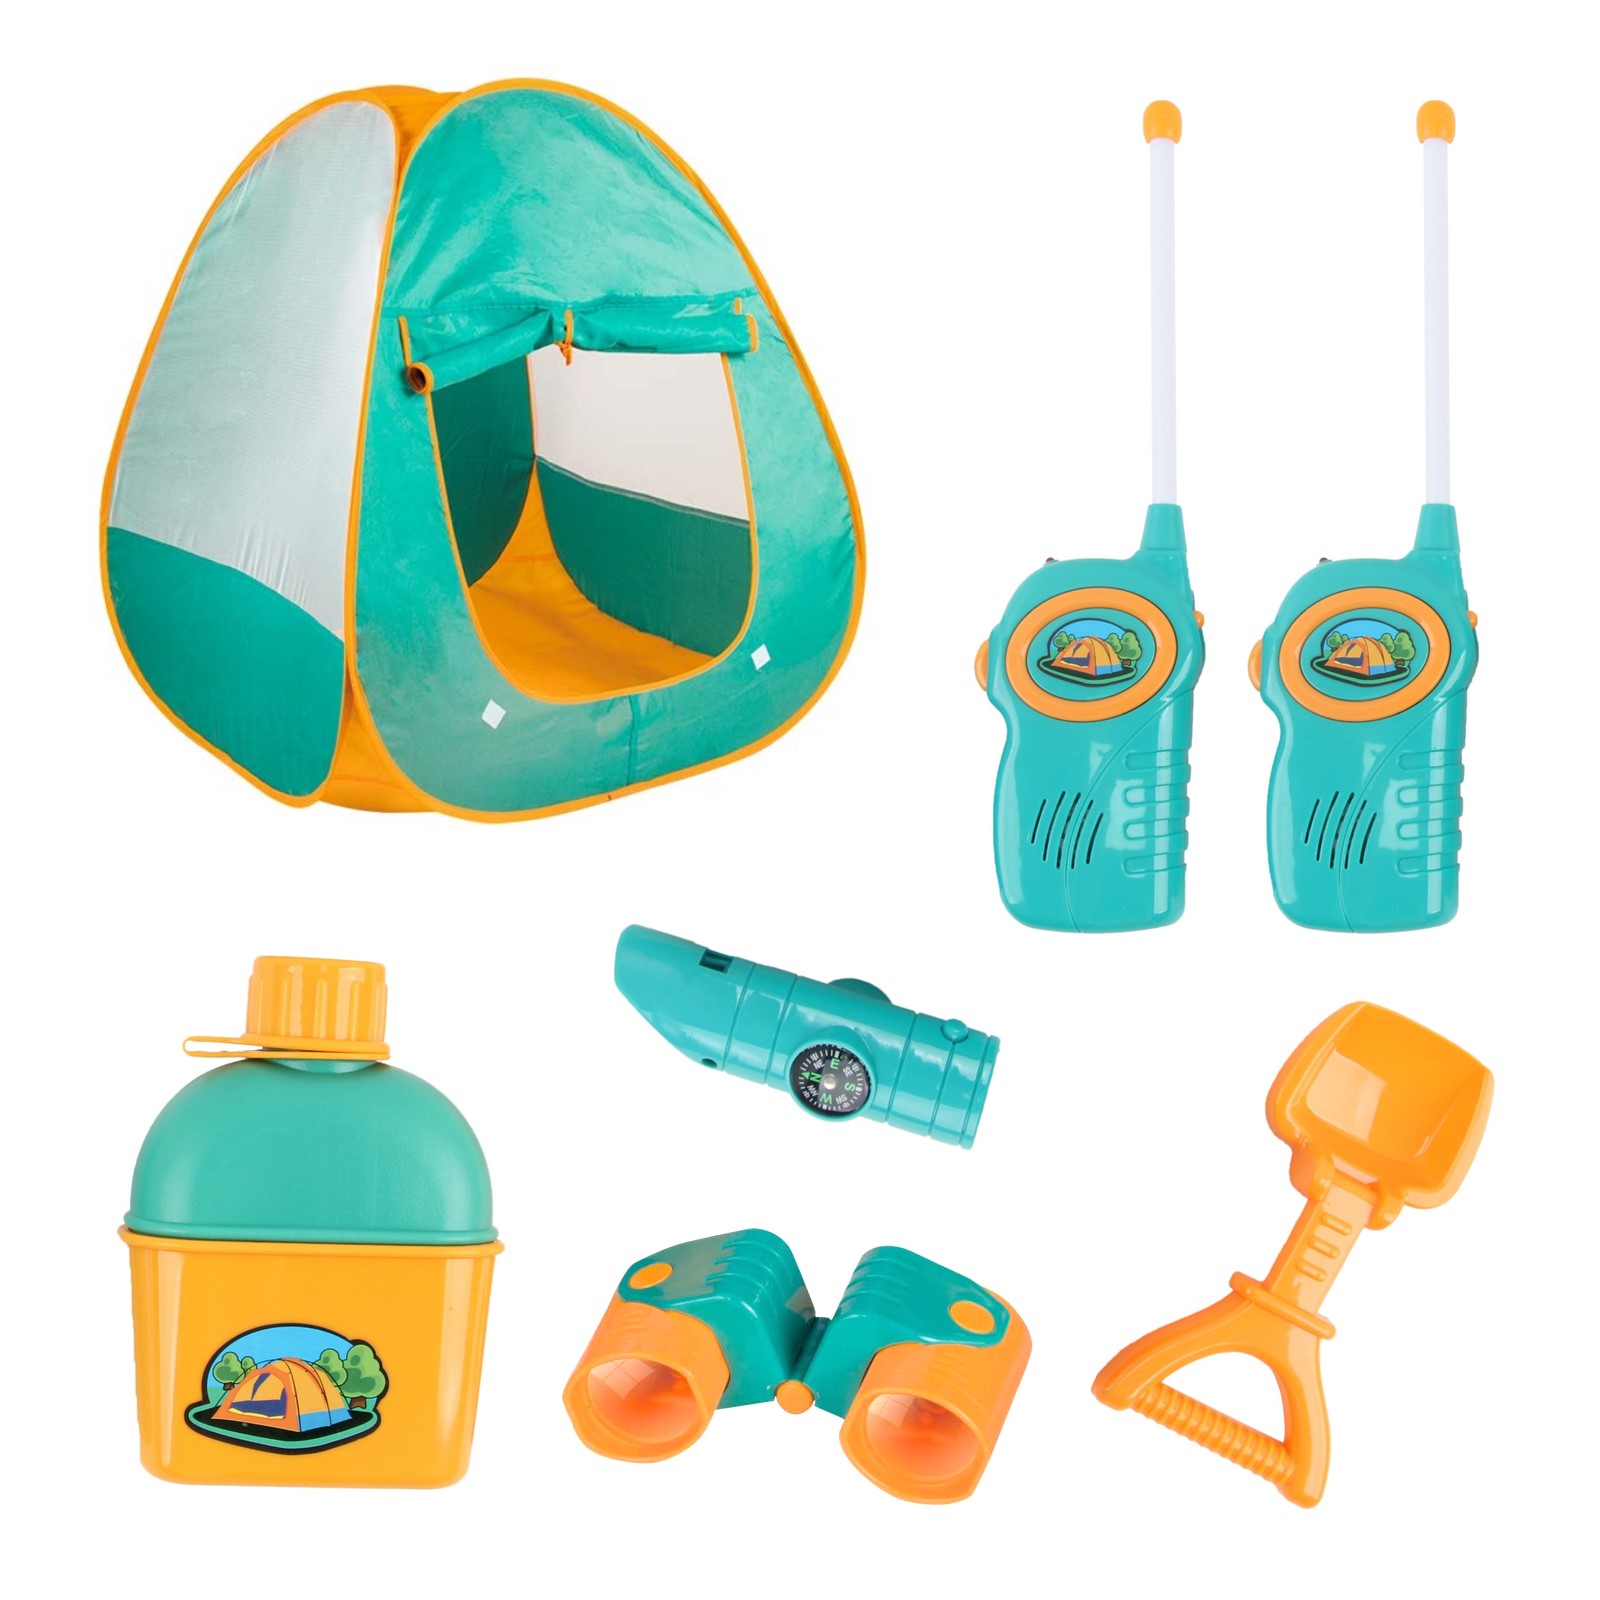 12 Piece Kids Tent Camping Set With Big Tent 2 Walkie Talkies Water Bottle Shovel Multifunctional Whistle Compass Flashlight And Thermometer Playhouse Toy House Children Boys Girls Boosts Imagination And Creativity Indoor Outdoor Use Educational